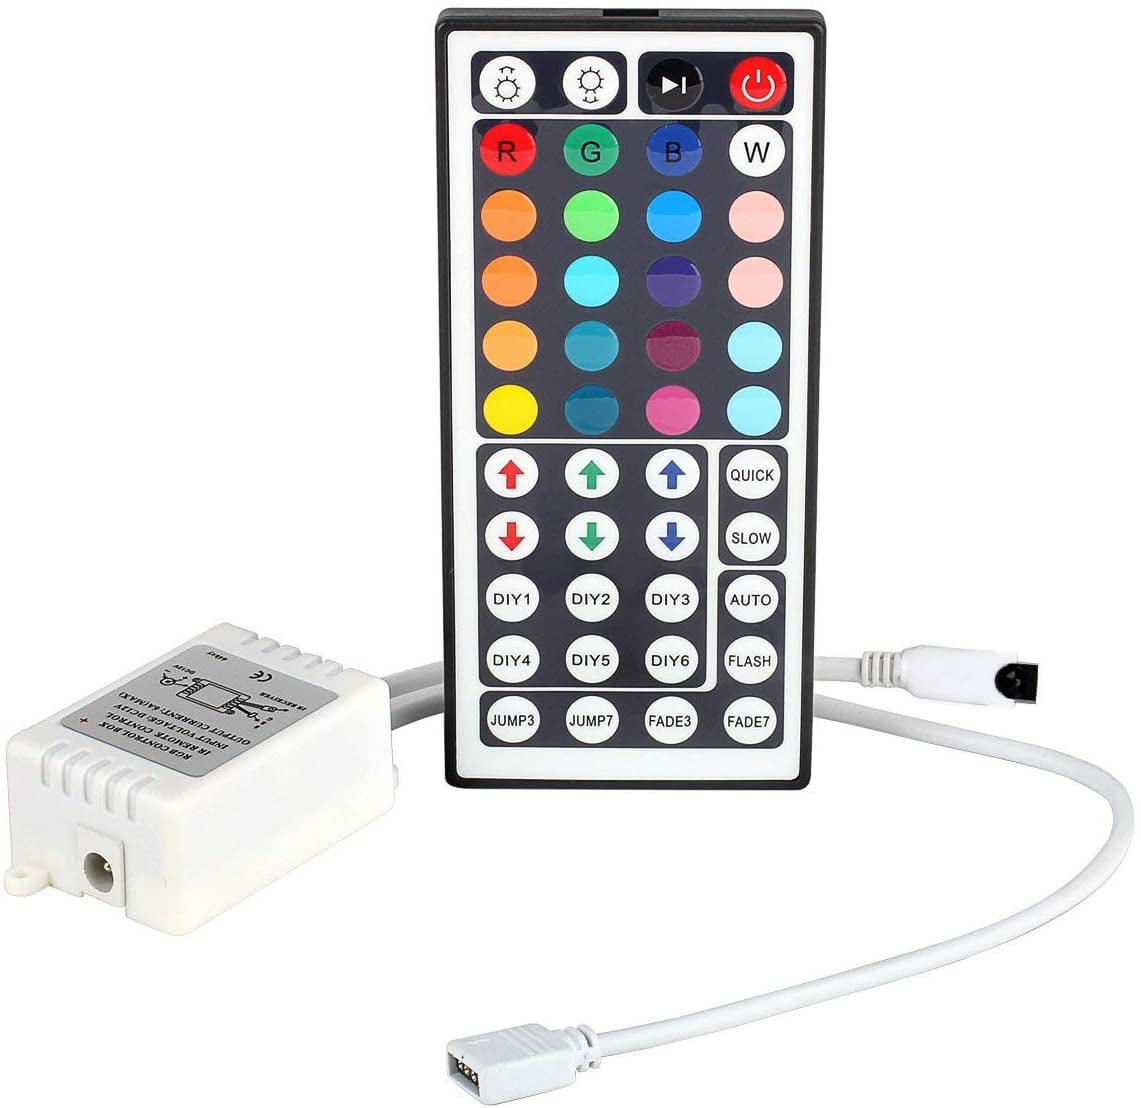 Details about   Bluetooth RGB LED 44 Key IR Remote Controller For LED Strip Lights 5050 2835 US 